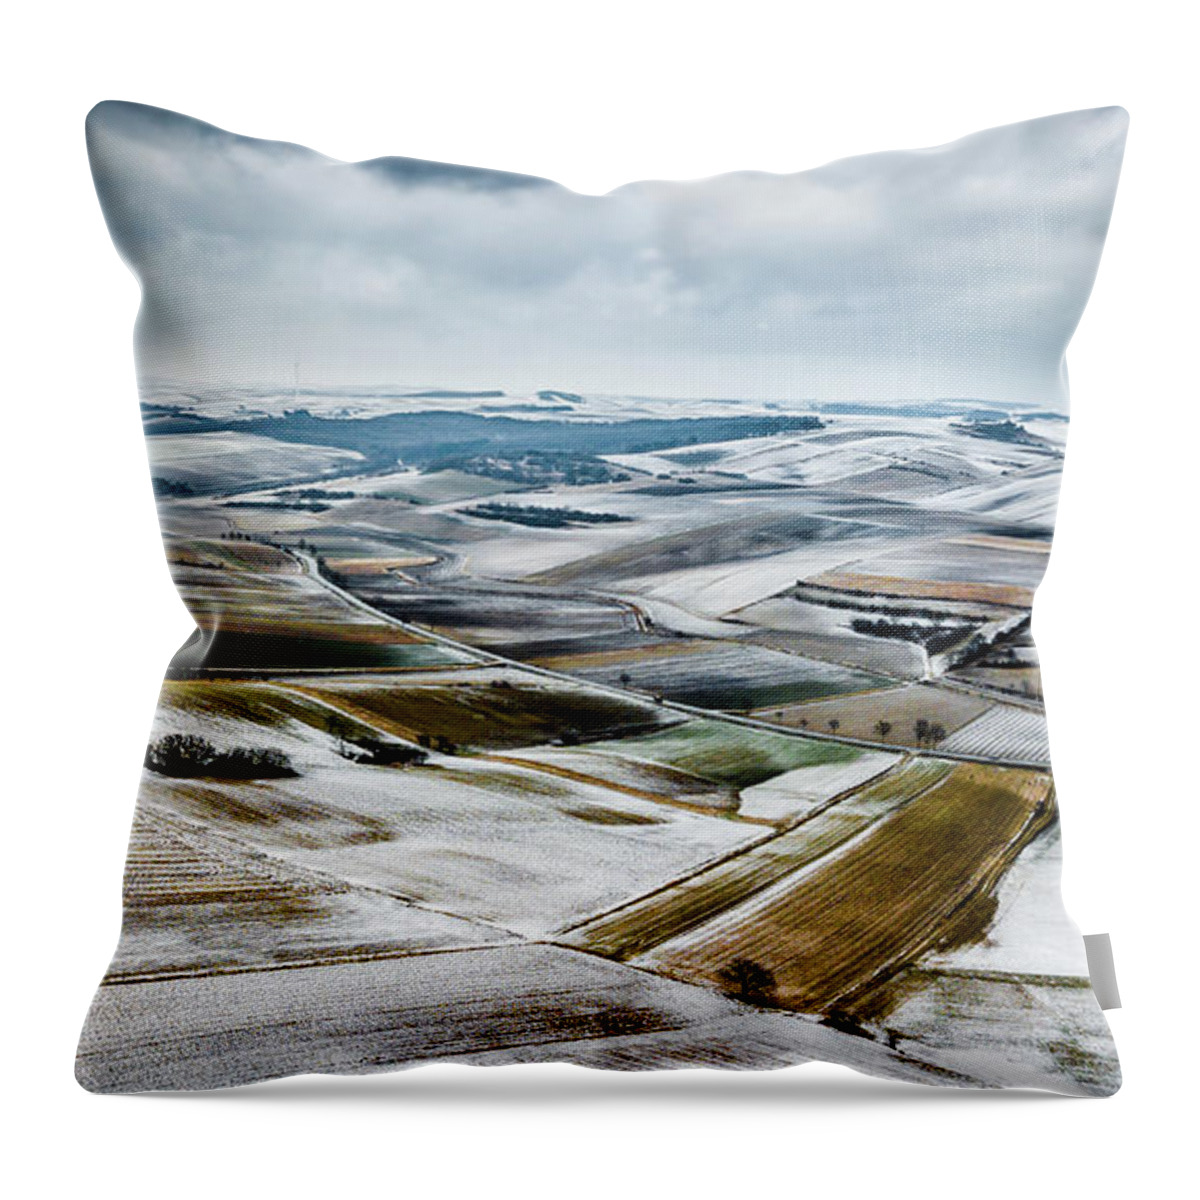 Above Throw Pillow featuring the photograph Aerial View Of Winter Landscape With Remote Settlements And Snow Covered Fields In Austria by Andreas Berthold